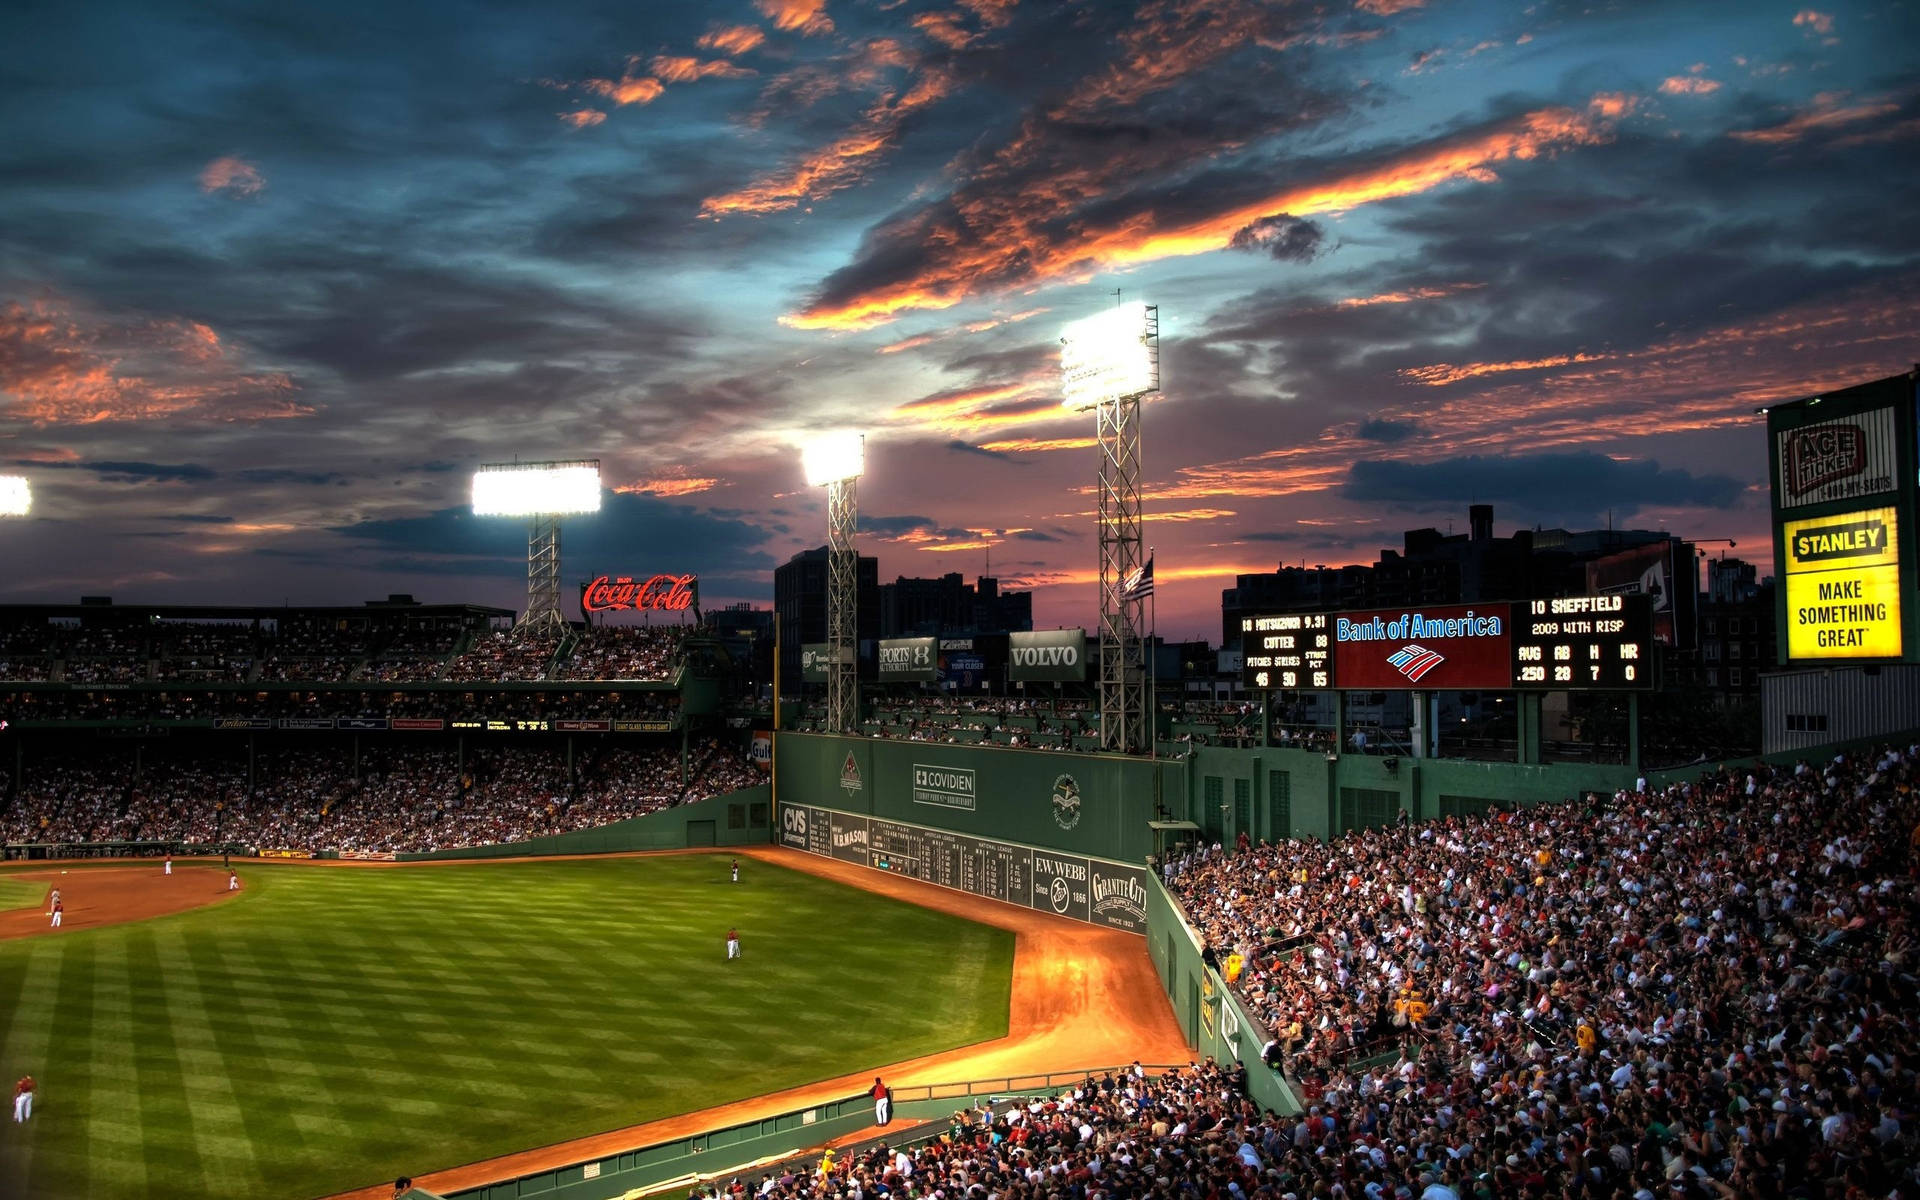 Beautiful Sky Above Red Sox Game